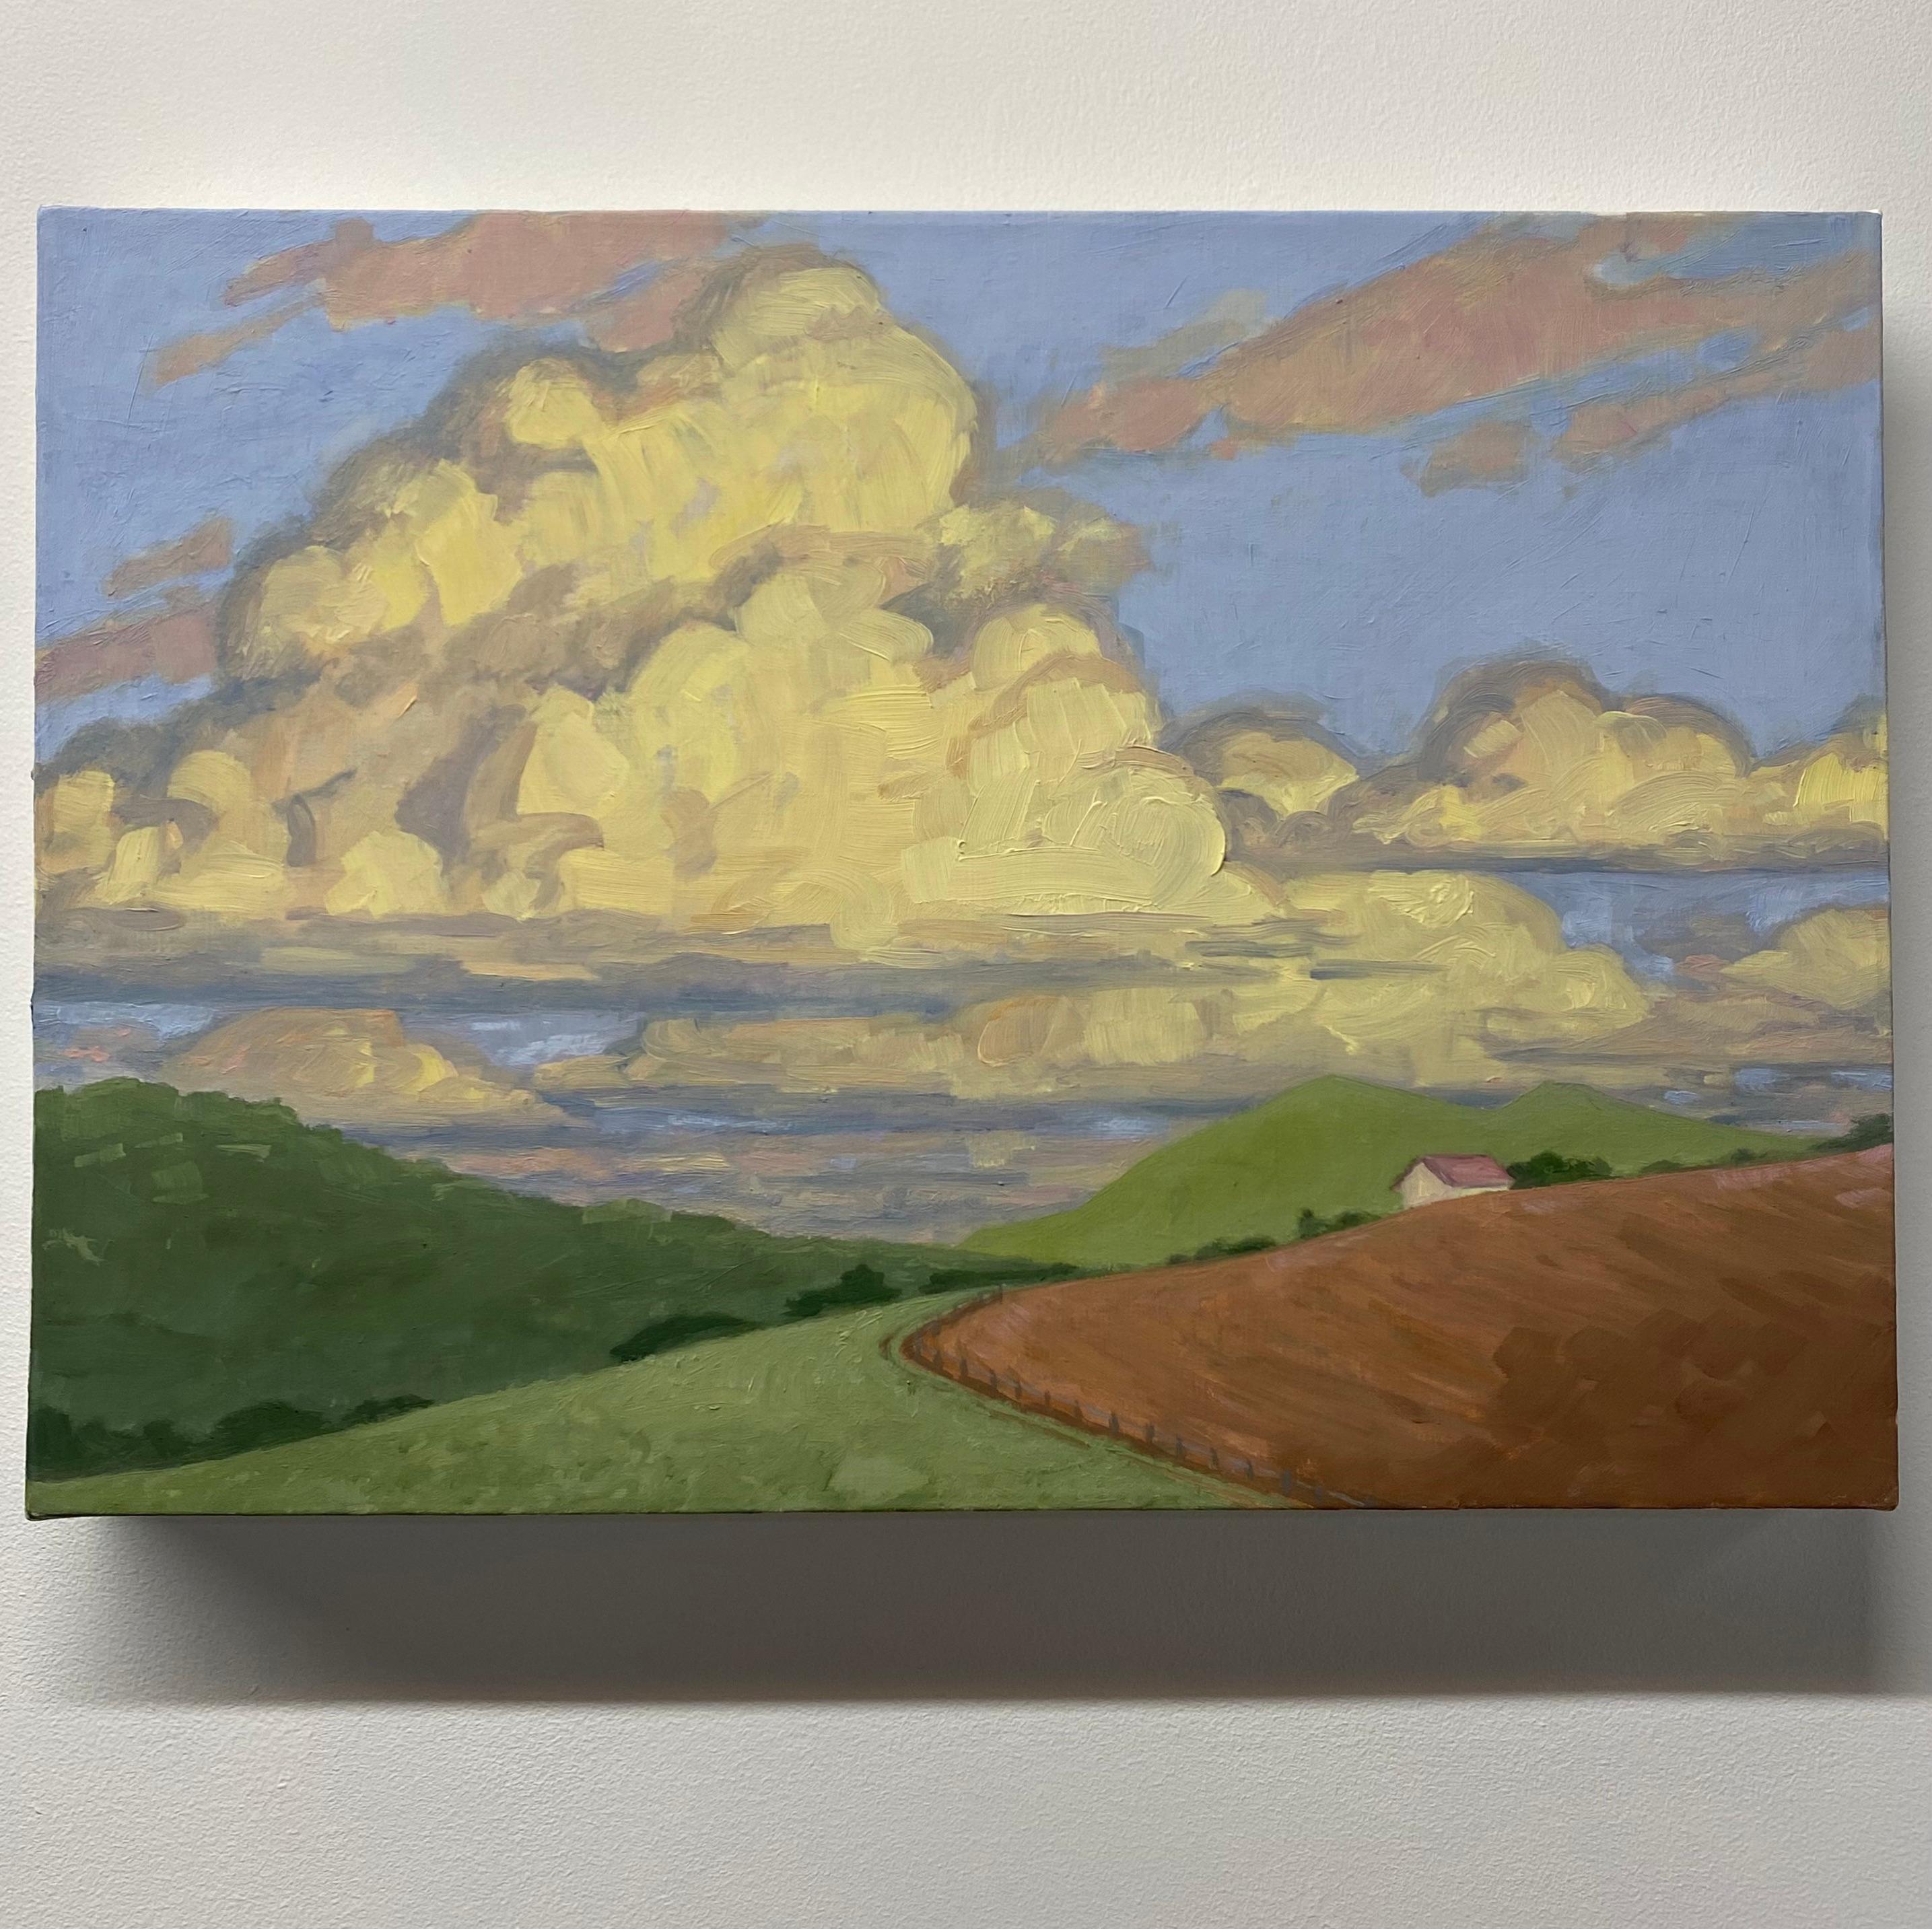 Late Afternoon, Green Hills, Fields, Blue Periwinkle Sky, Ivory Clouds, House - Painting by KK Kozik